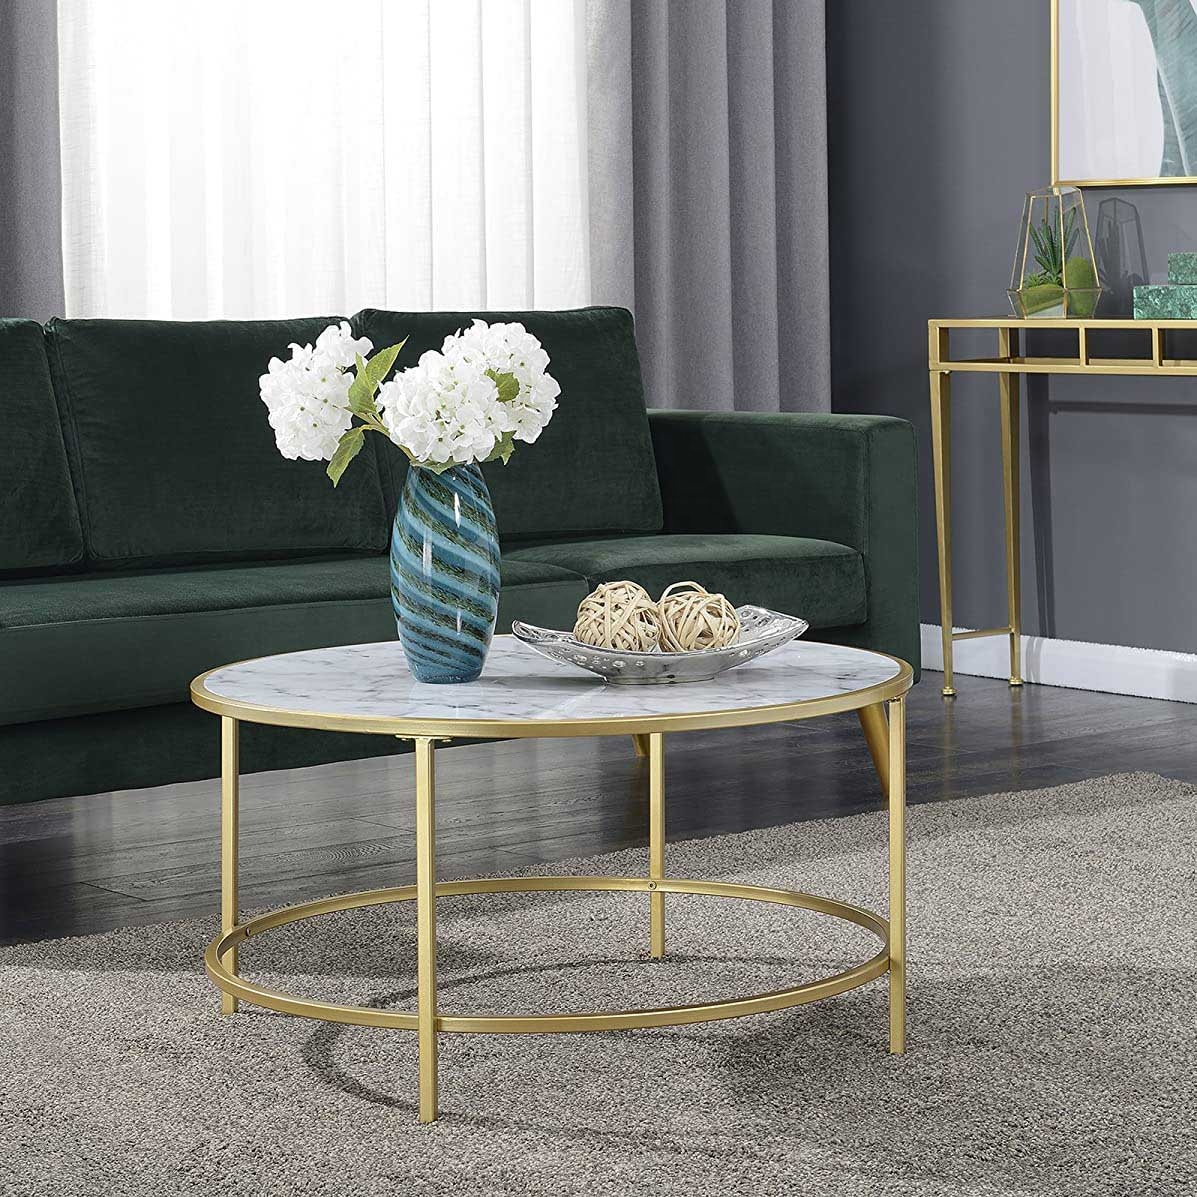 Wholesale Manufacturer Supplier Round Marble Top Gold Metal Coffee Table Modern Luxury Design for Living Room